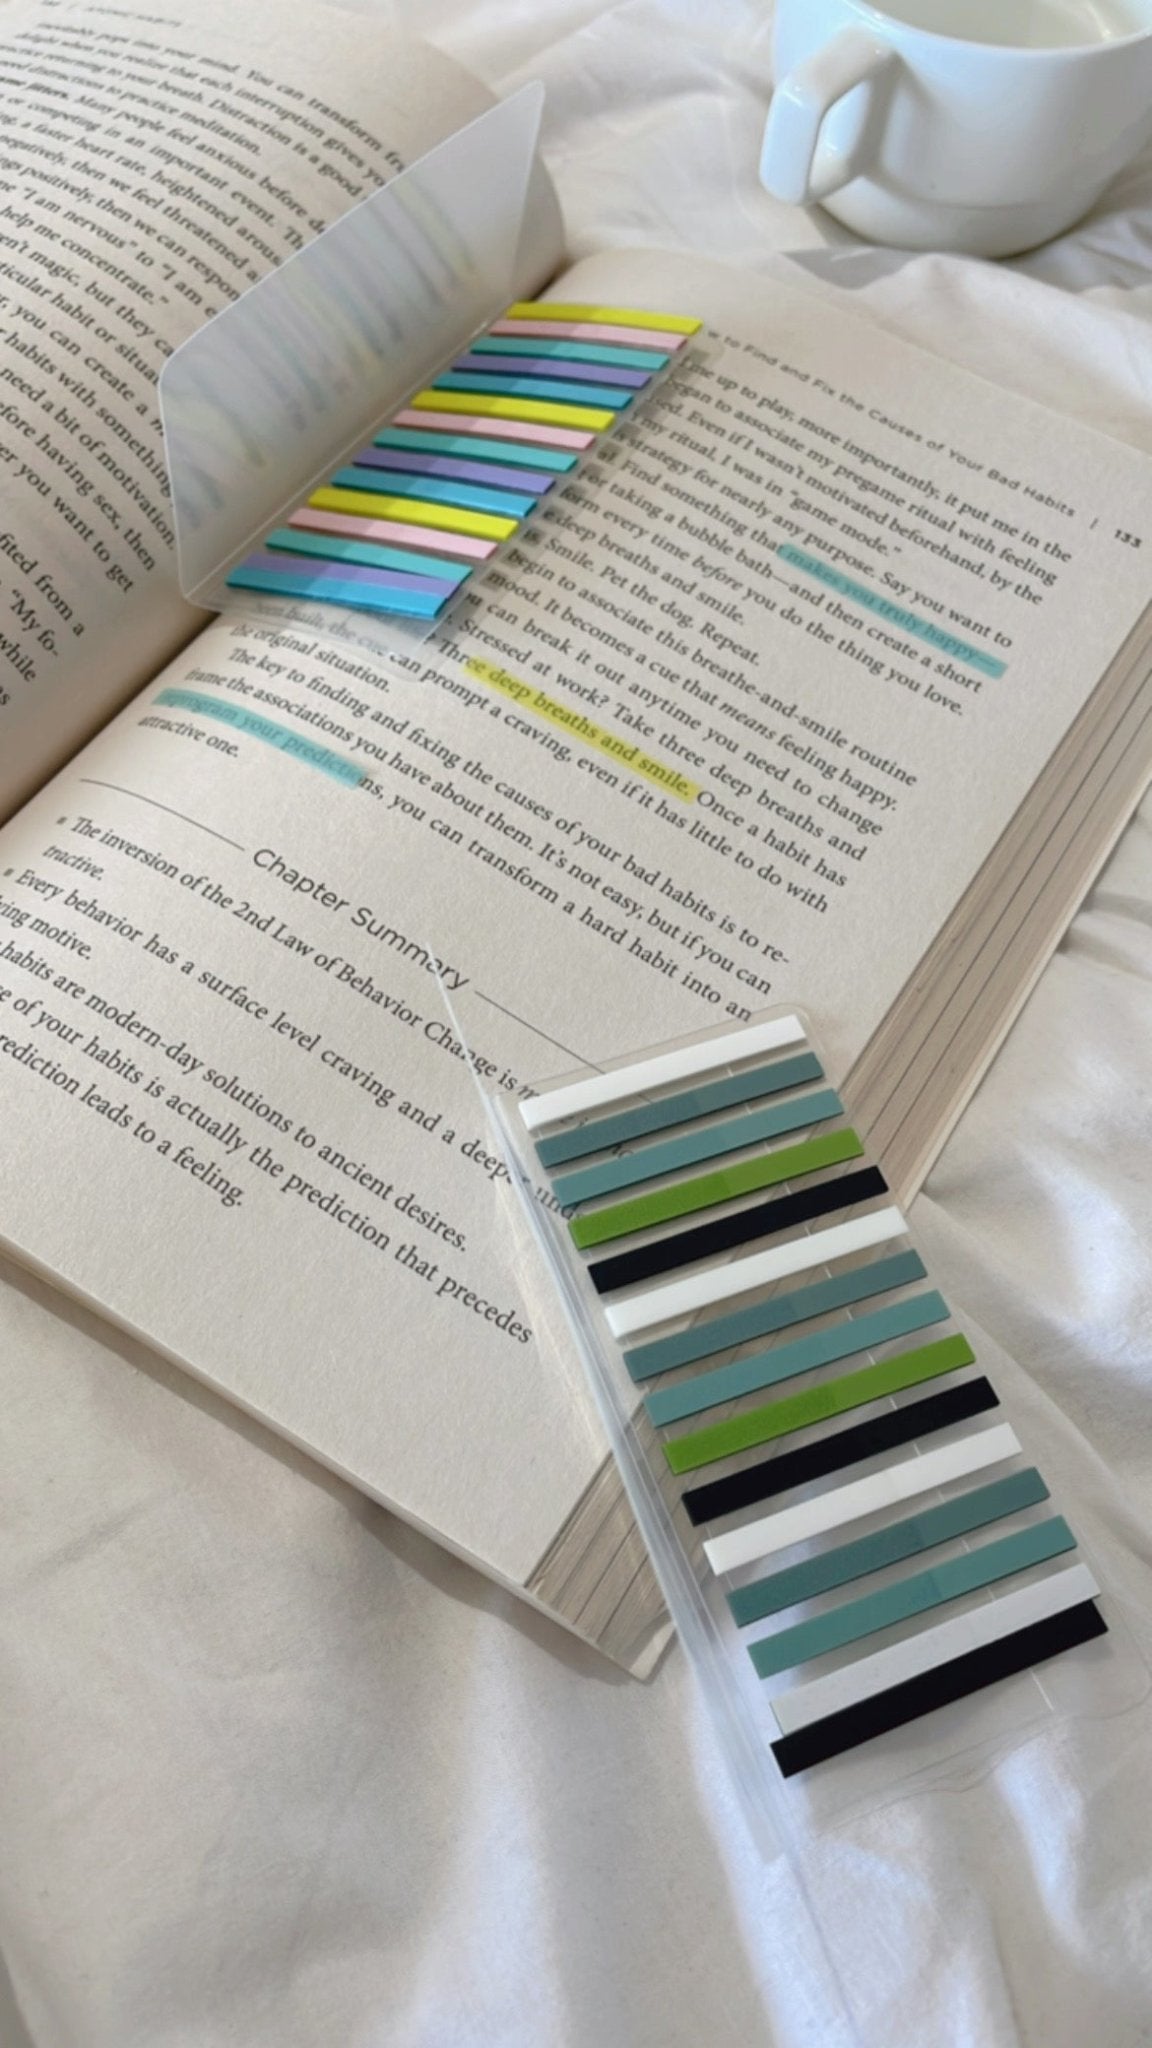 Classic thin highlighting strips Sticky notes | Available in 2 themes